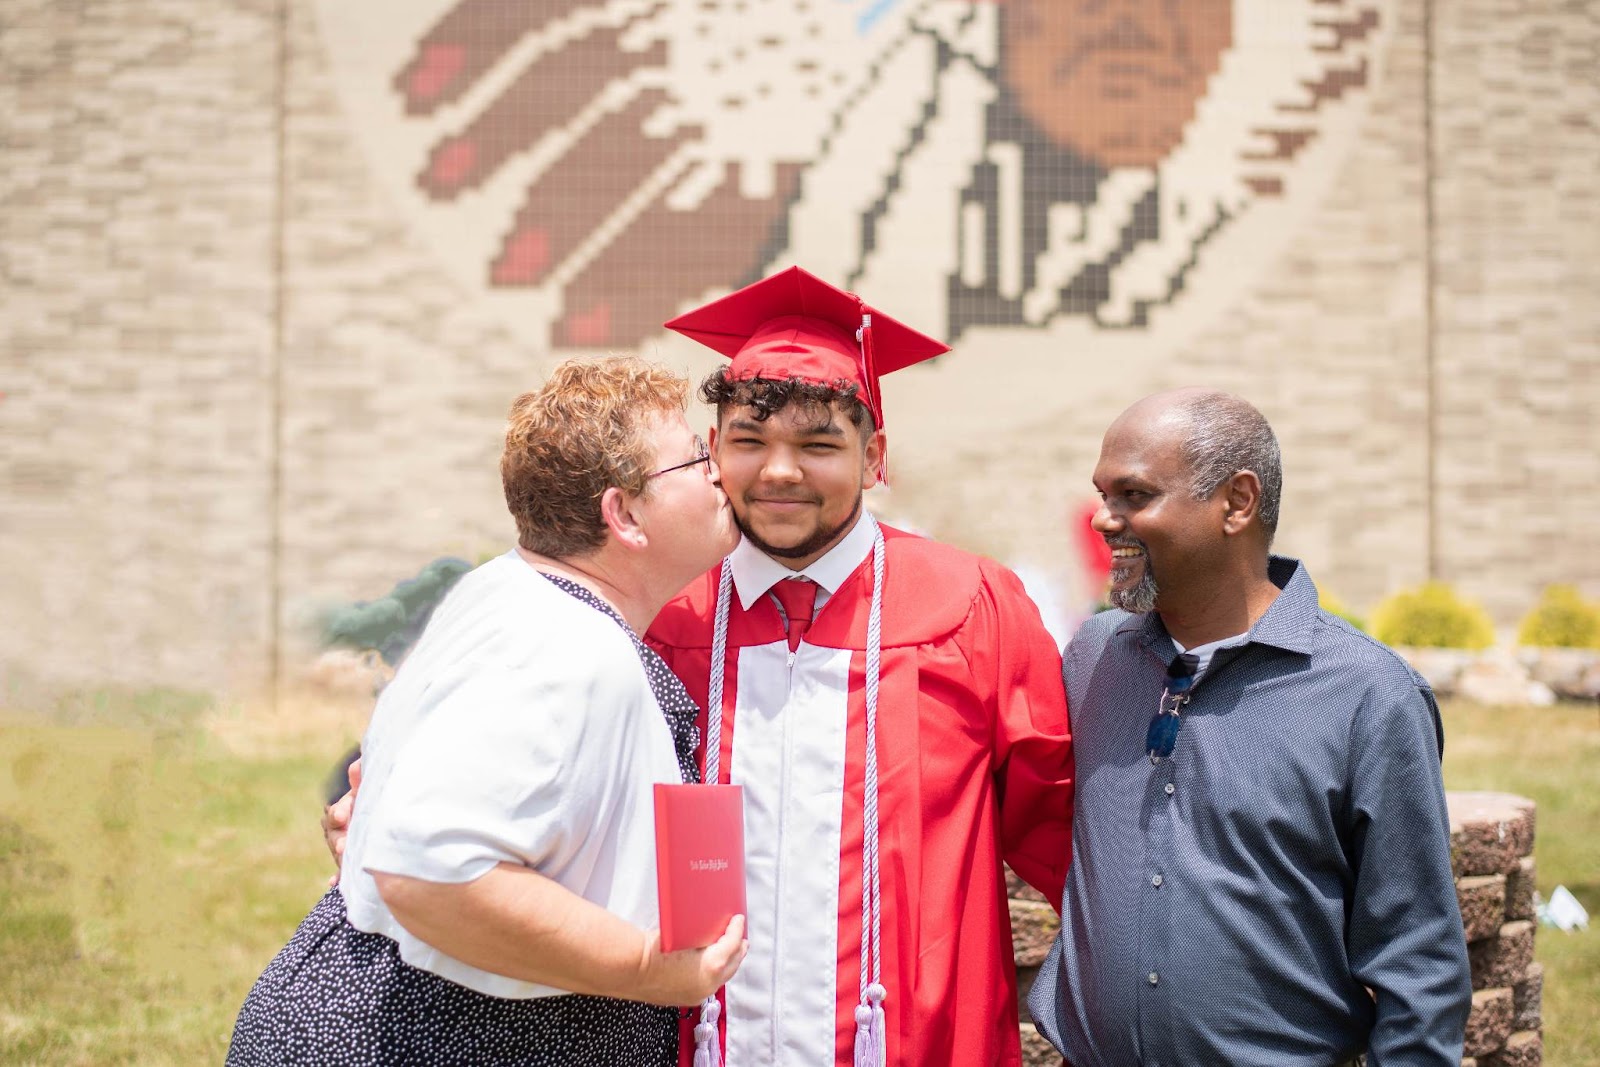 Bryce Beharry standing with his mother and father outside of his high school wearing his cap and gown, all smiling with his mother kissing his cheek